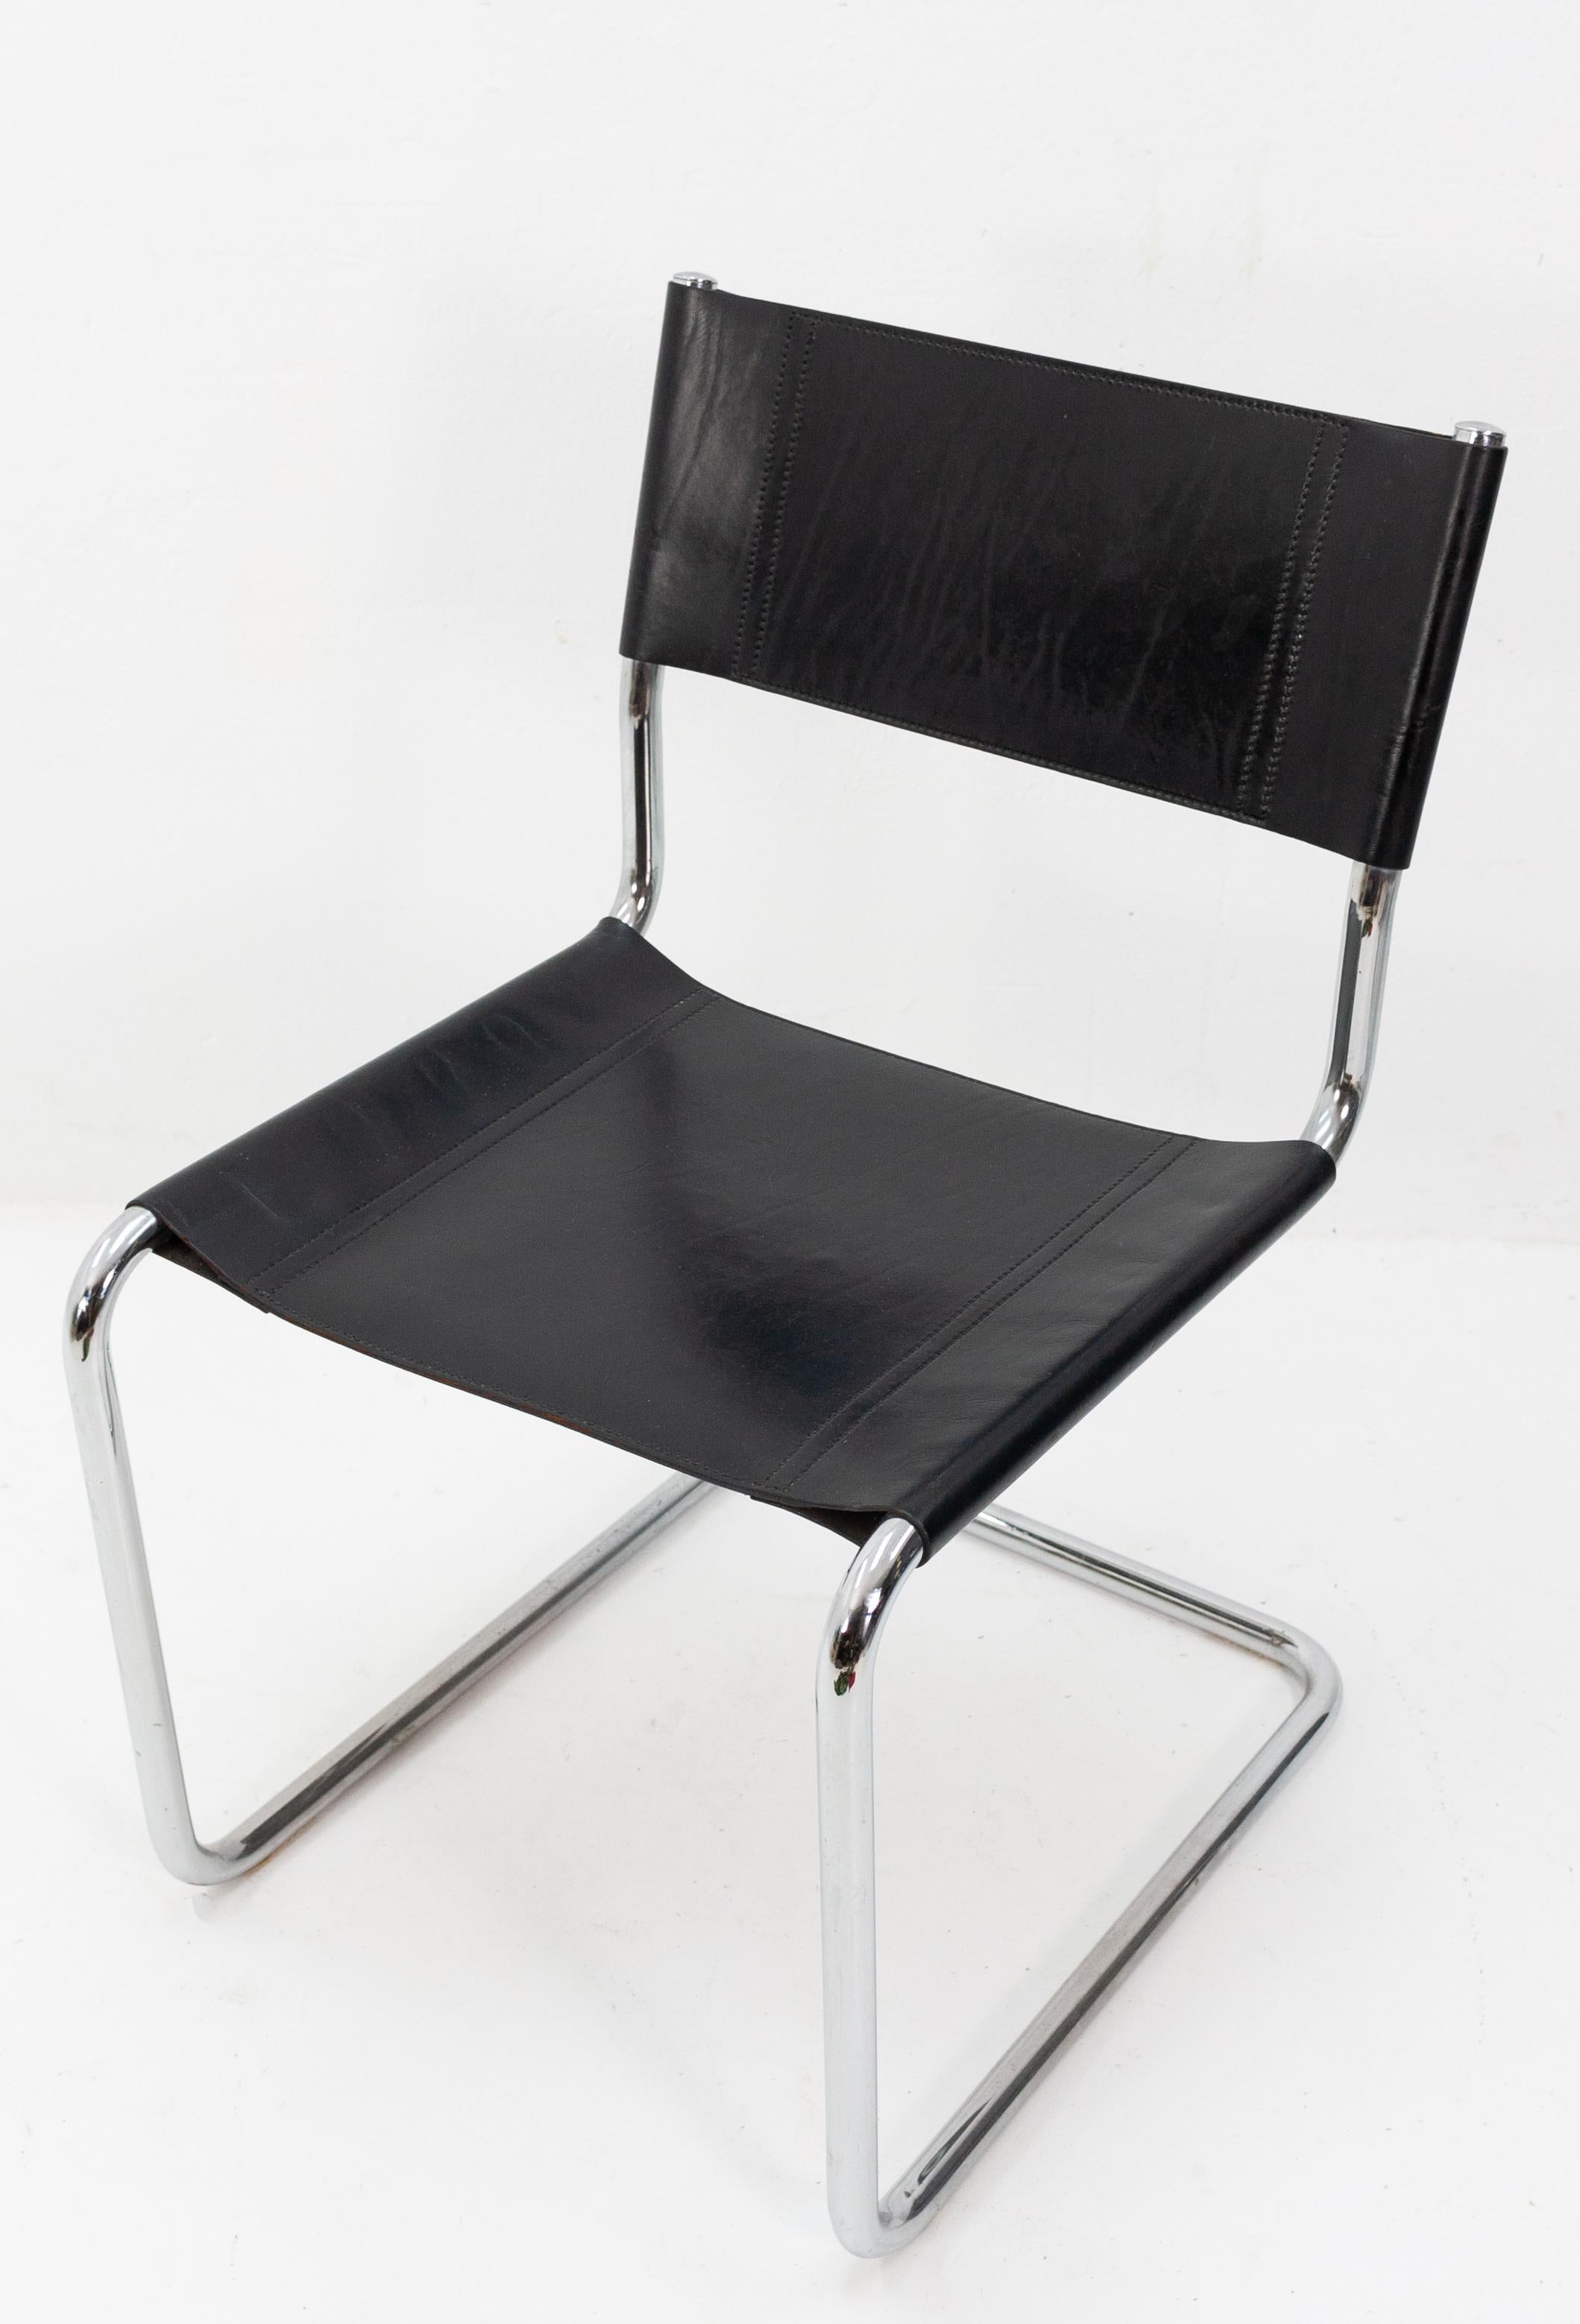 Leather Bauhaus Linea Veam Cantilever Chairs